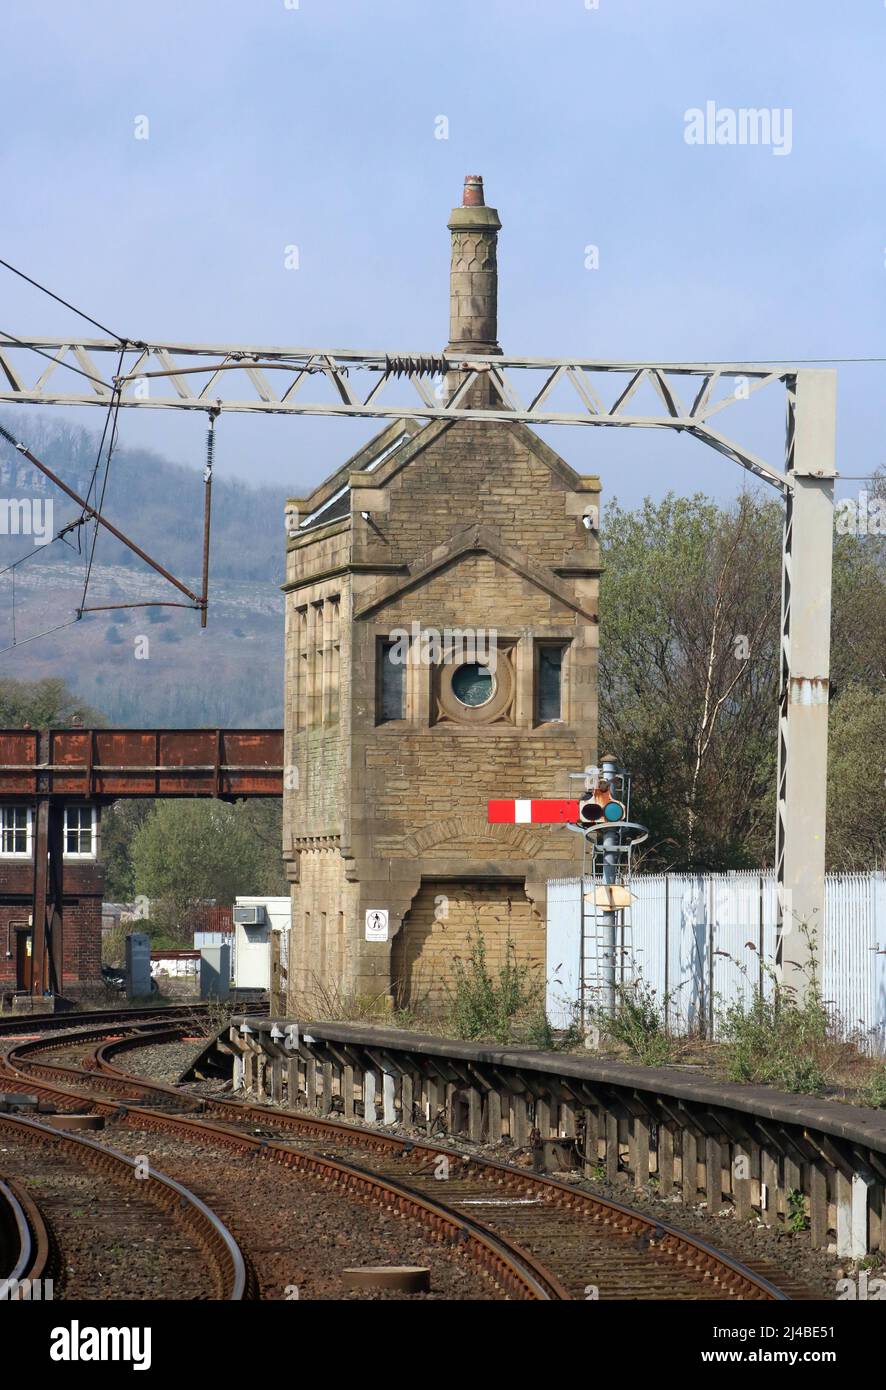 Disused old Midland railway stone signalbox on the end of Carnforth station platform 2 with red semaphore signal and track. Stock Photo